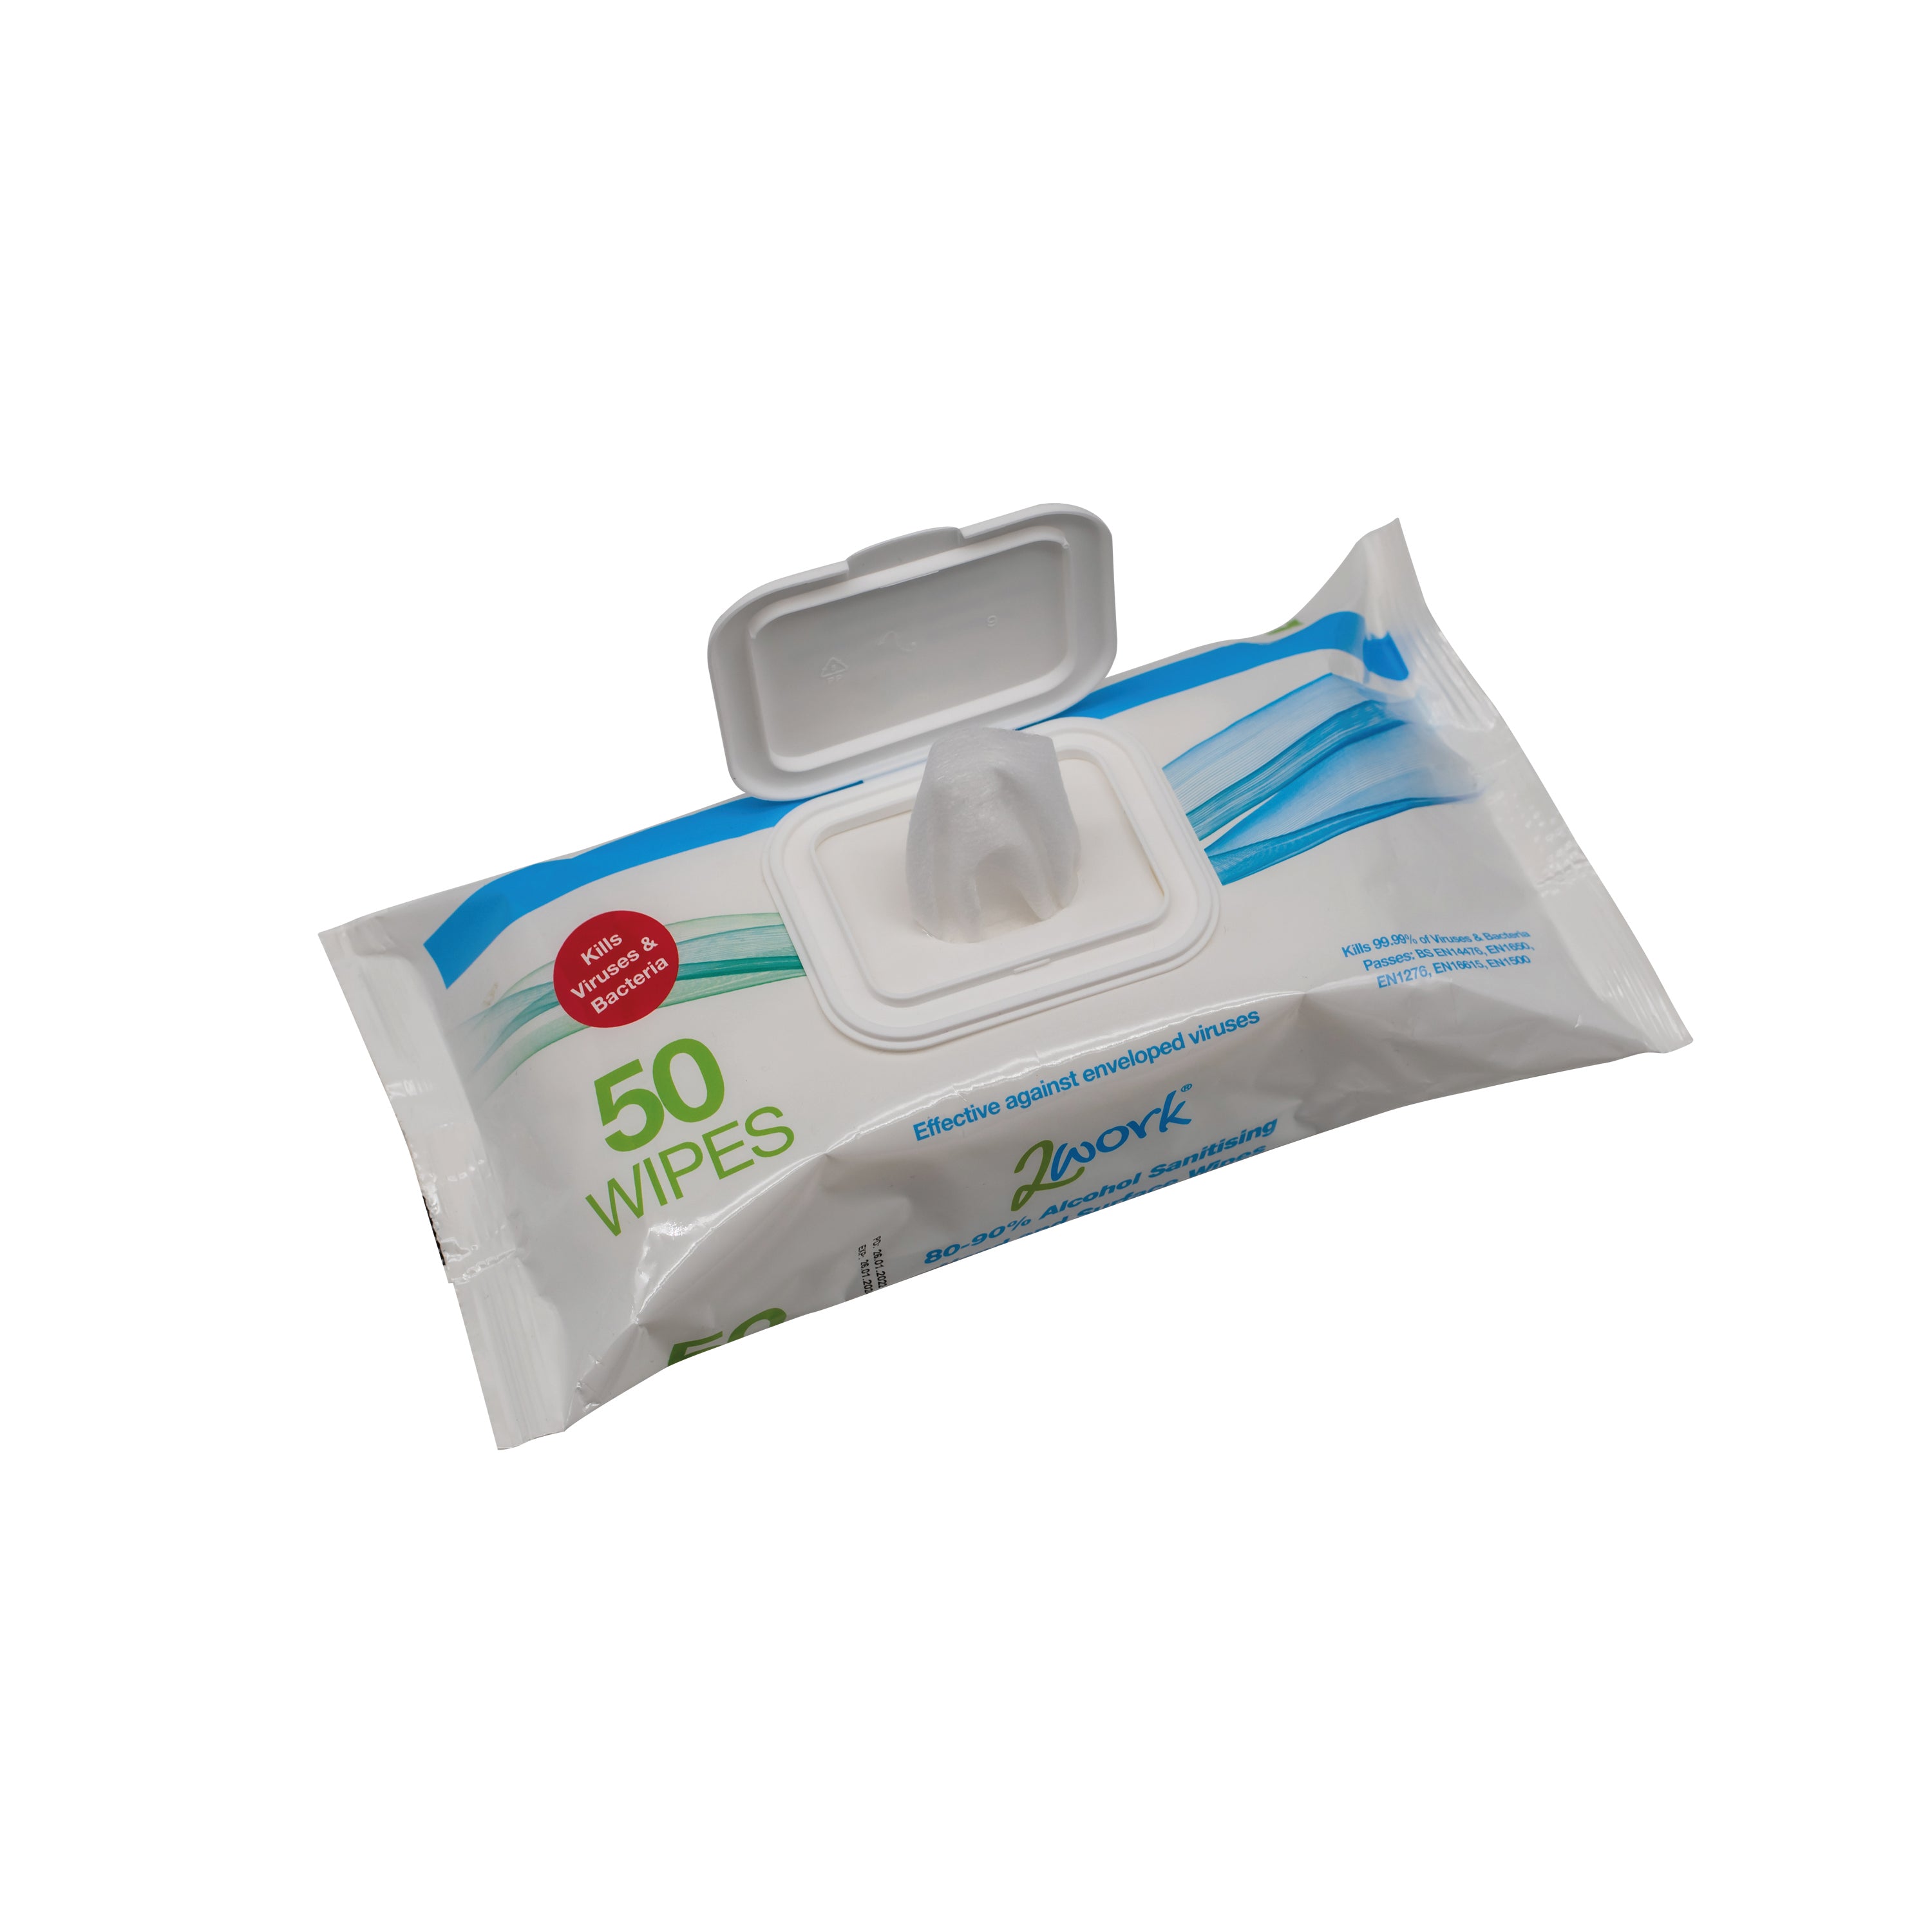 2Work Antibacterial Alcohol Hand Wipes Unfragranced (Pack of 50) 2W03485